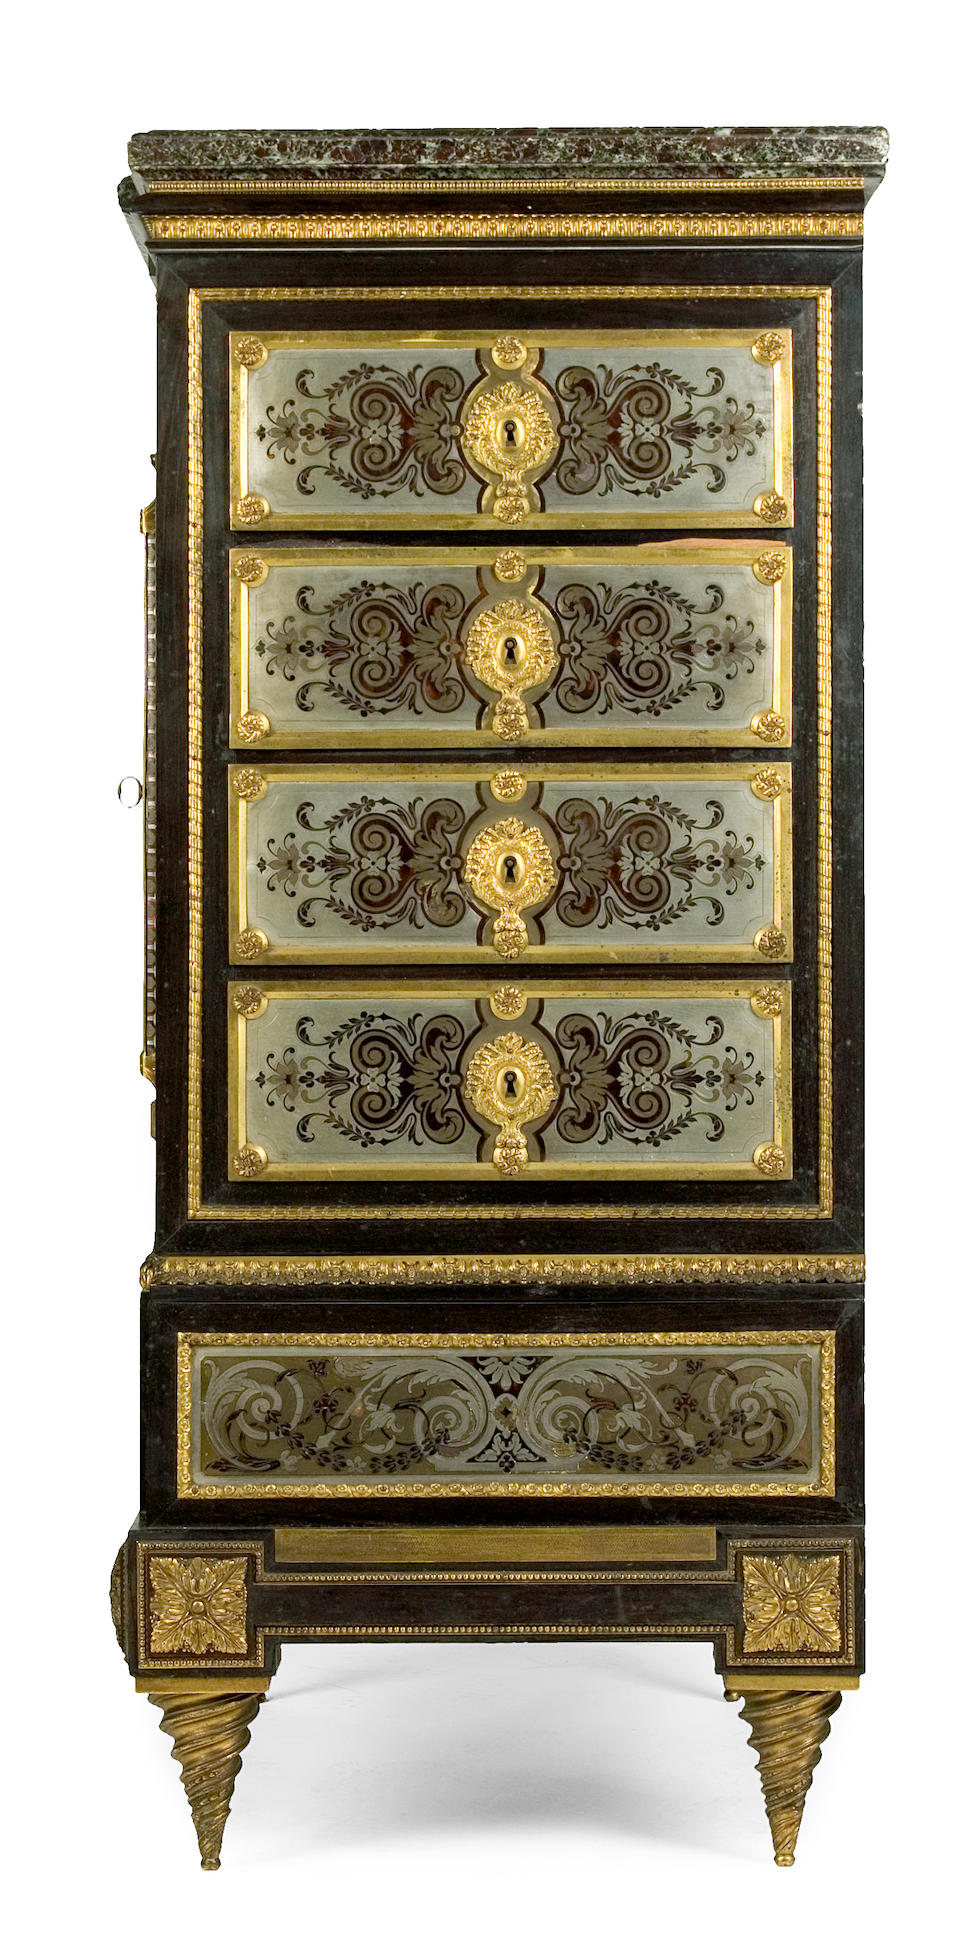 A fine Louis XIV style gilt bronze mounted pewter, brass and tortoiseshell premi&#232;re and contrepartie ebonized meuble d'appui after a model by Andr&#233;-Charles Boulle (1642-1732)  second half 19th century